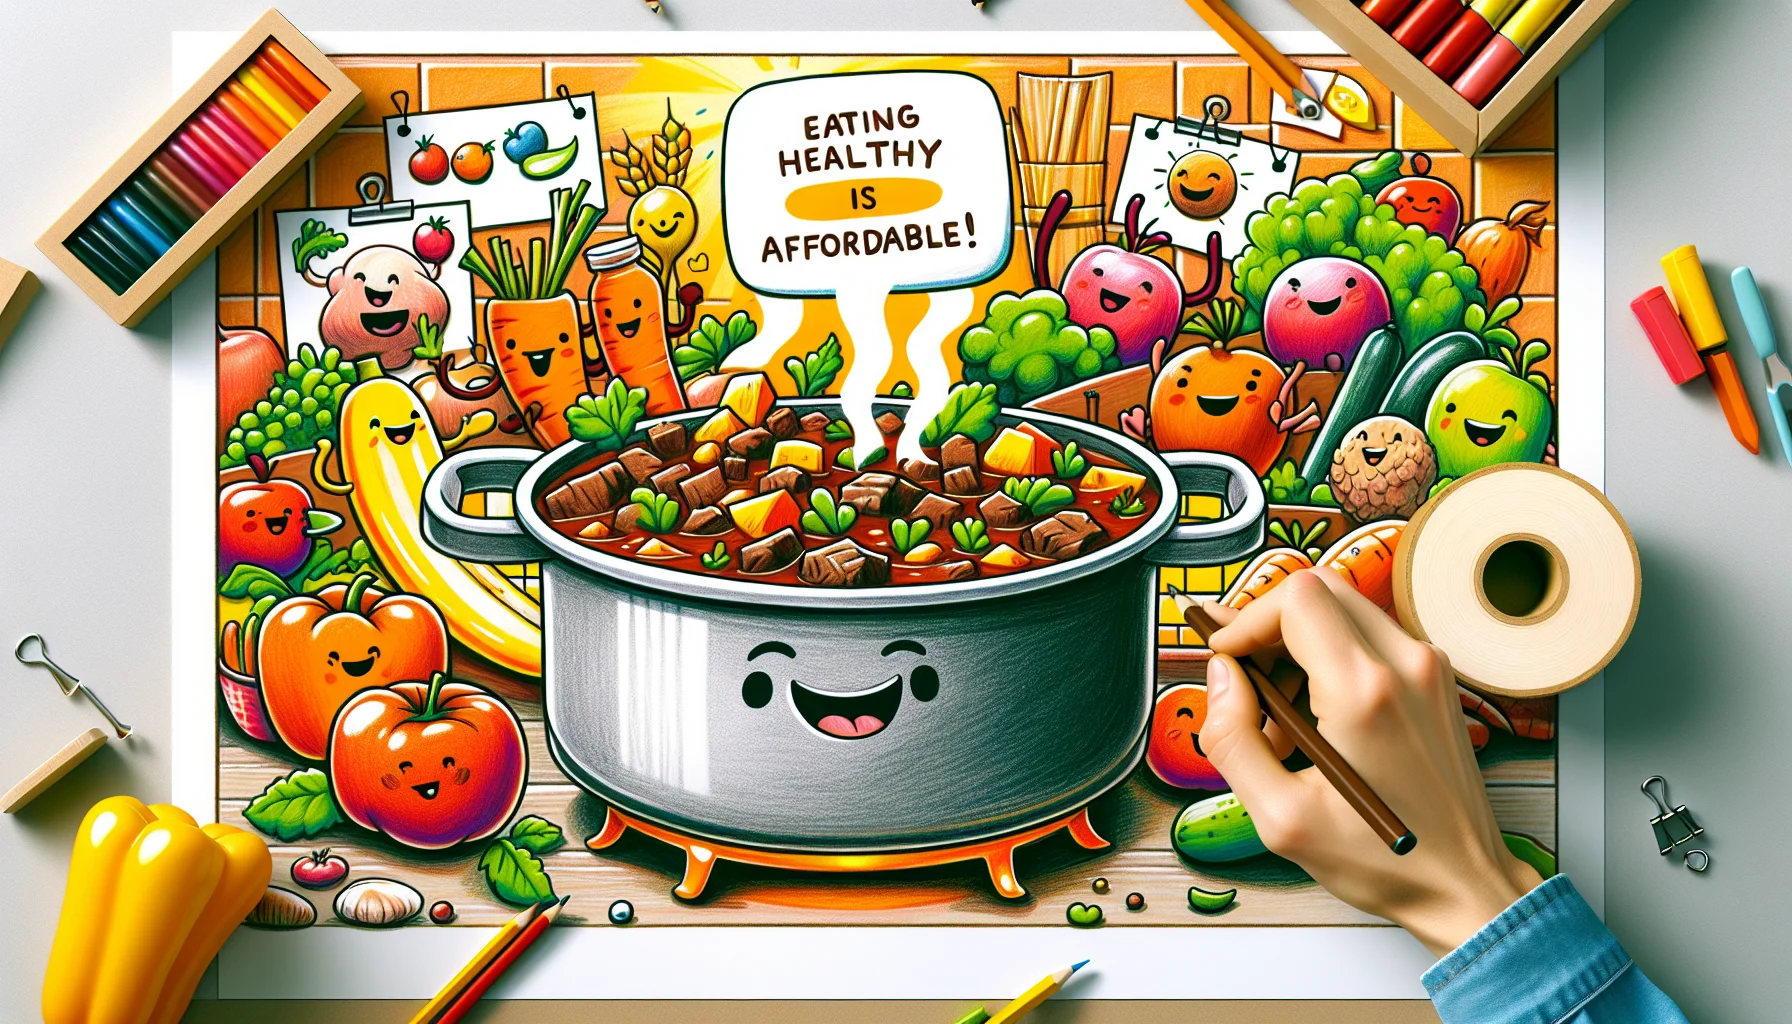 Draw a picture featuring a pot of beef stew, full of hearty vegetables and tender meat, simmering on a stove. The colors are warm and appetizing. Create a jovial setting around this with smiling kitchen tools, dancing and cheering as they participate in the dish's preparation. Nearby, a poster hangs in the background, picturing fruits, vegetables, grains, and other healthy, budget-friendly foods. The poster bears a slogan, 'Eating Healthy is Affordable!' to inspire viewers.